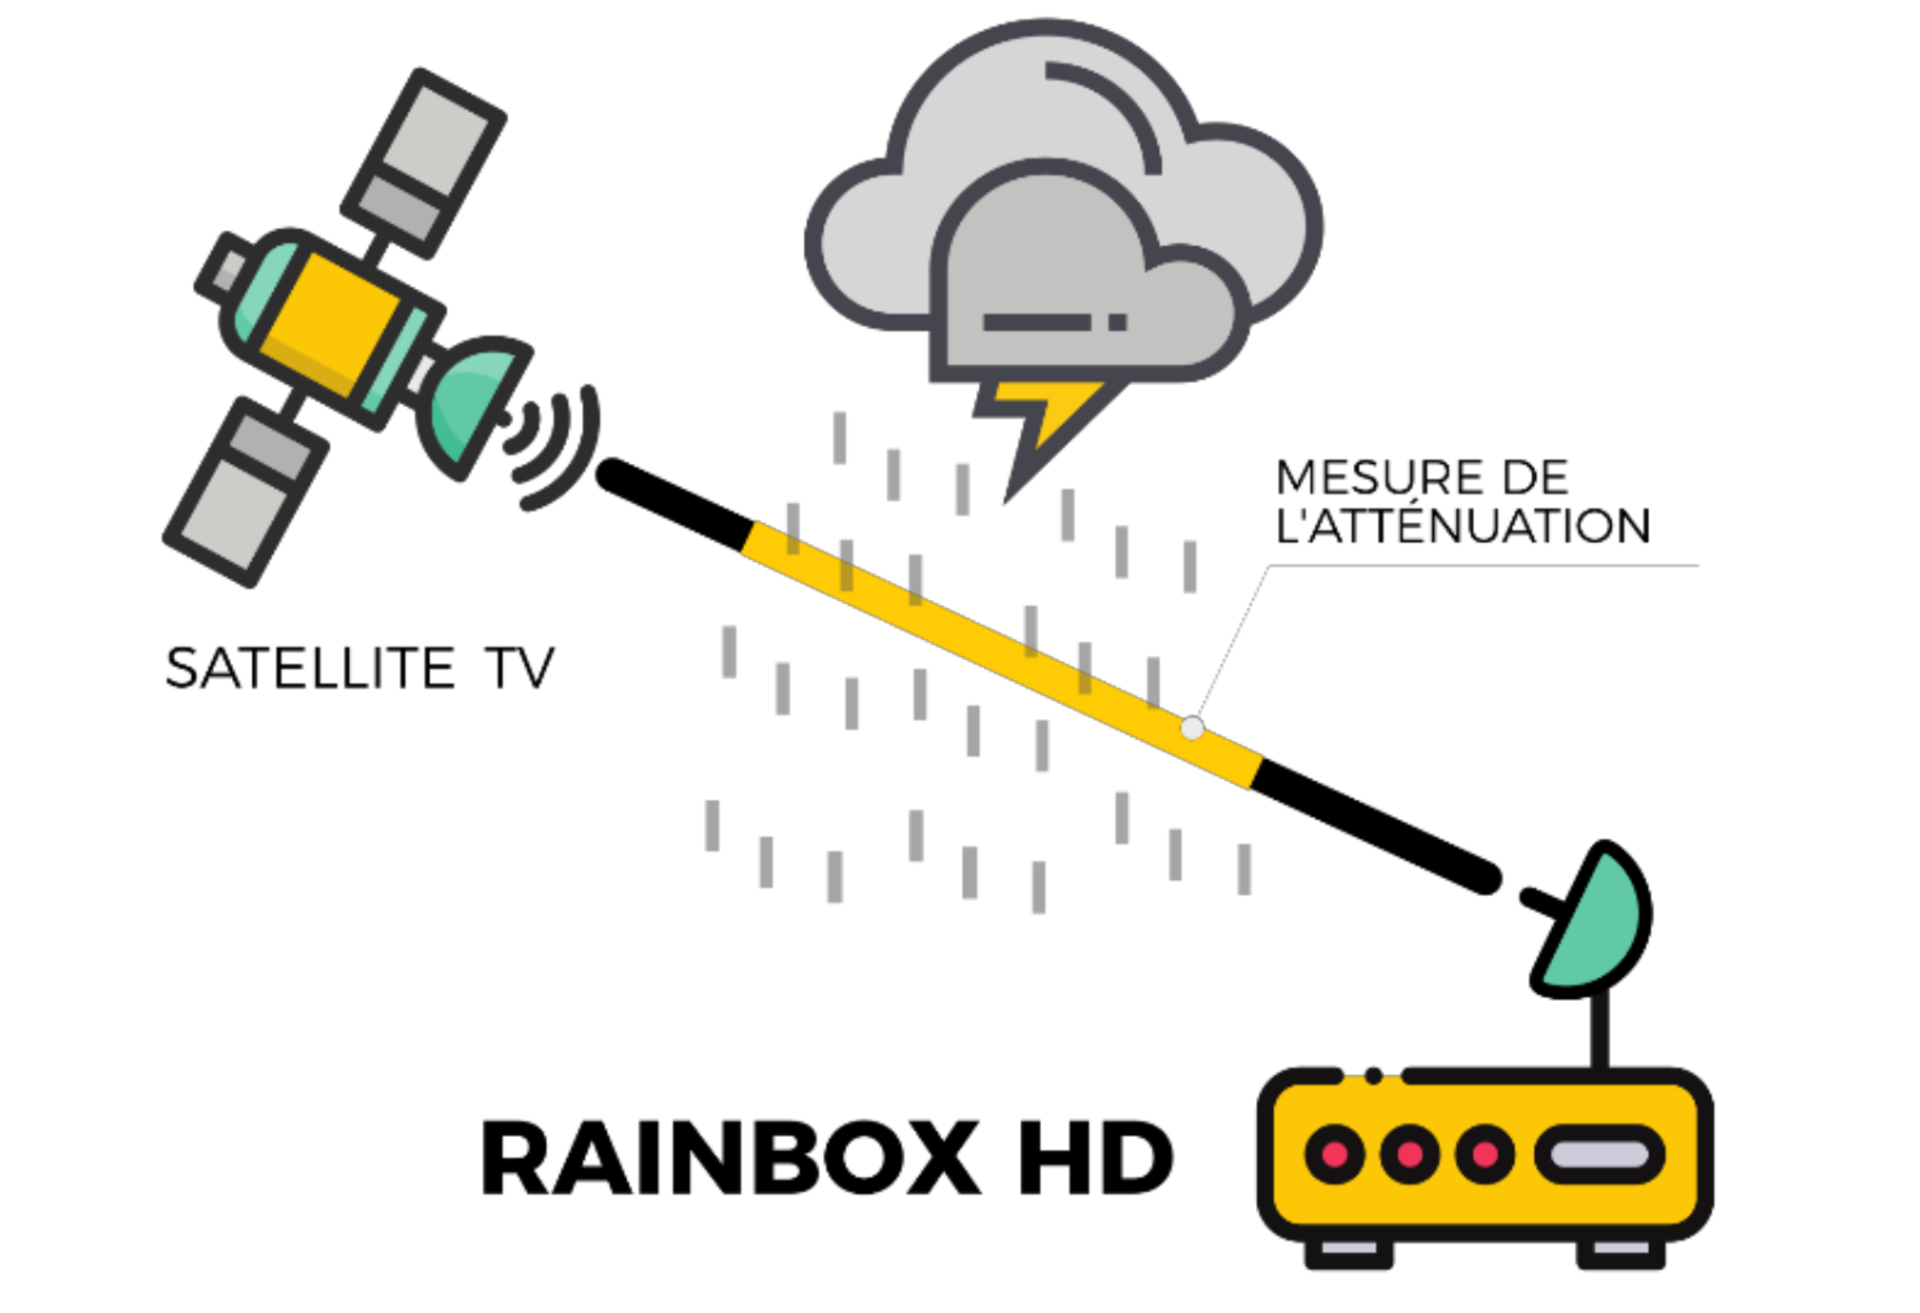 Measuring influence by rainfall on TV-satellite signals